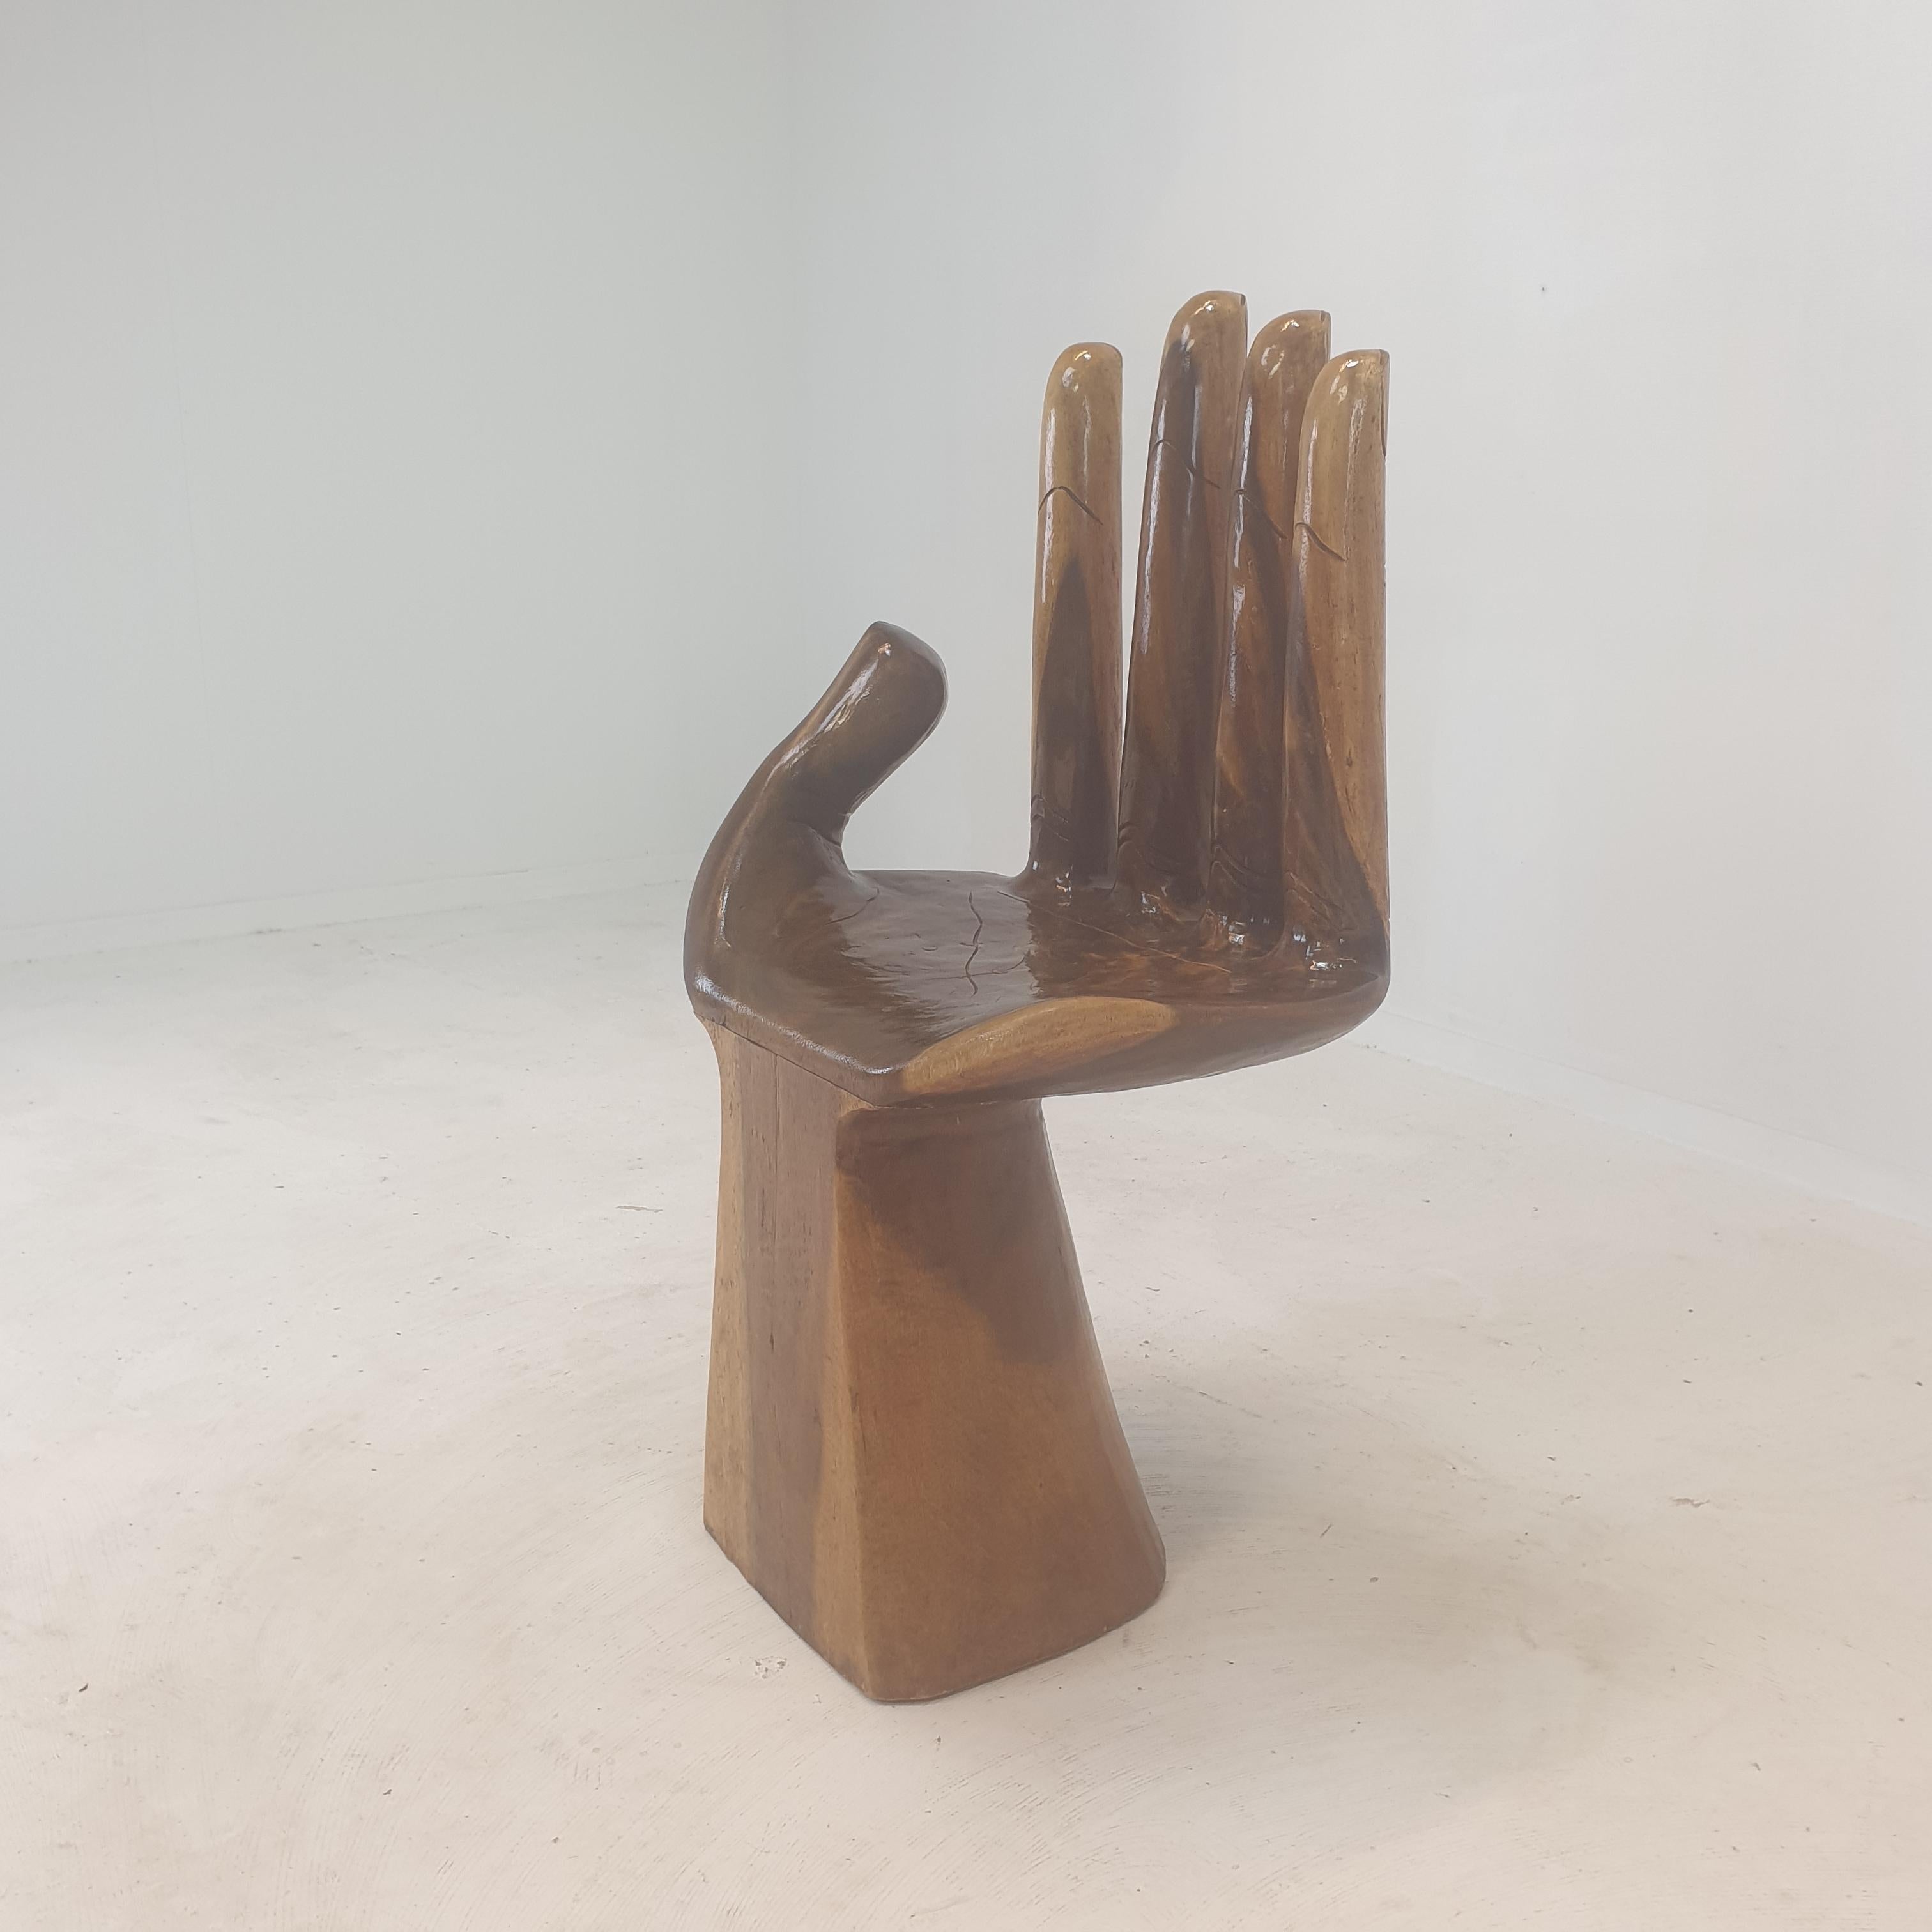 Hand-Crafted Wooden Hand Chair in the Style of Pedro Friedeberg, 1970's